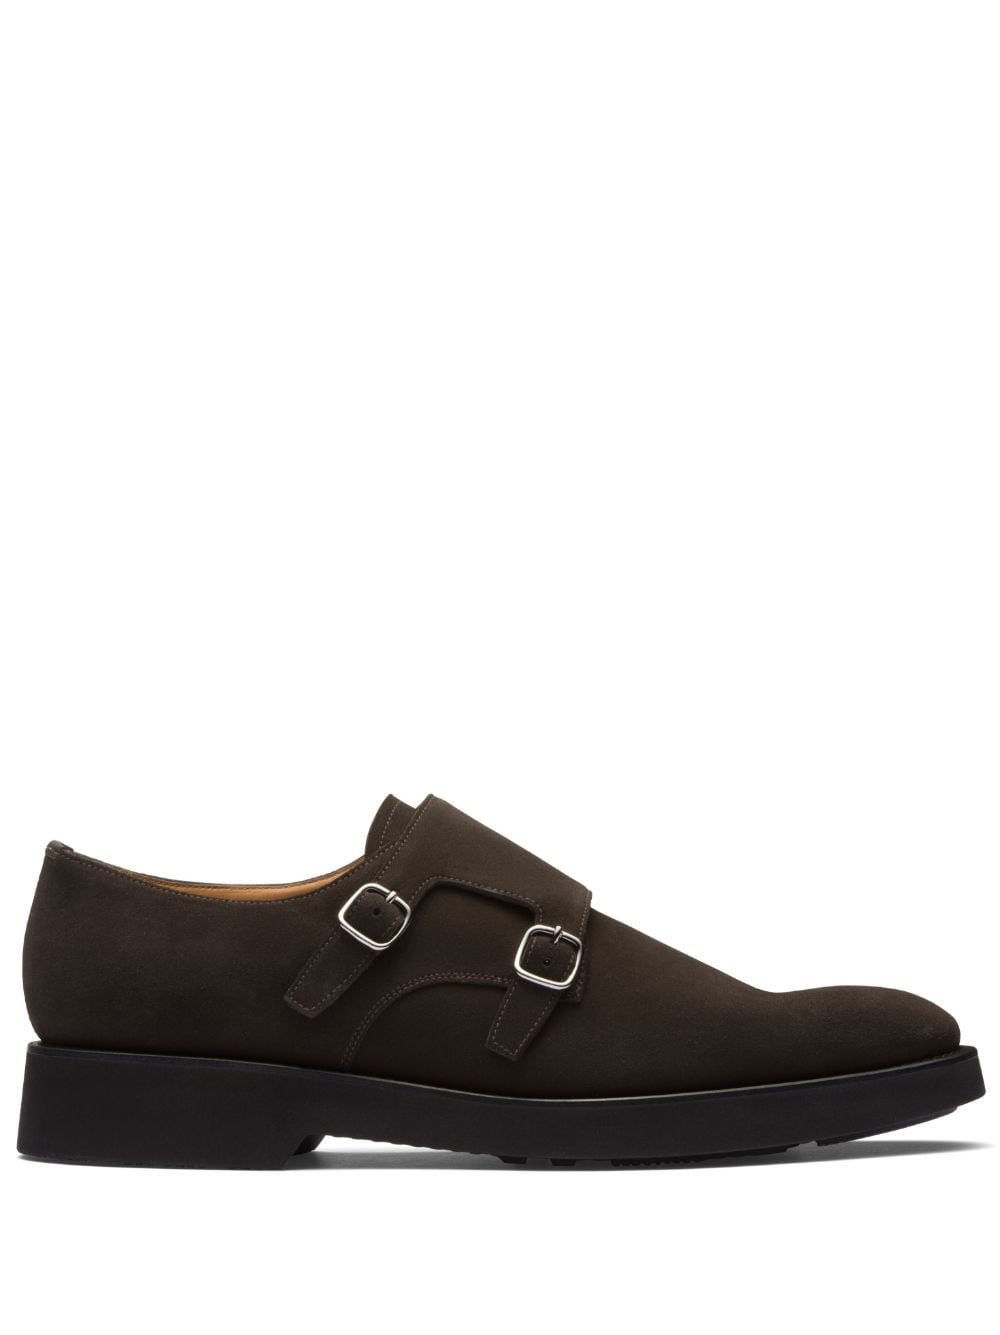 Church's buckled leather monk shoes - Brown von Church's